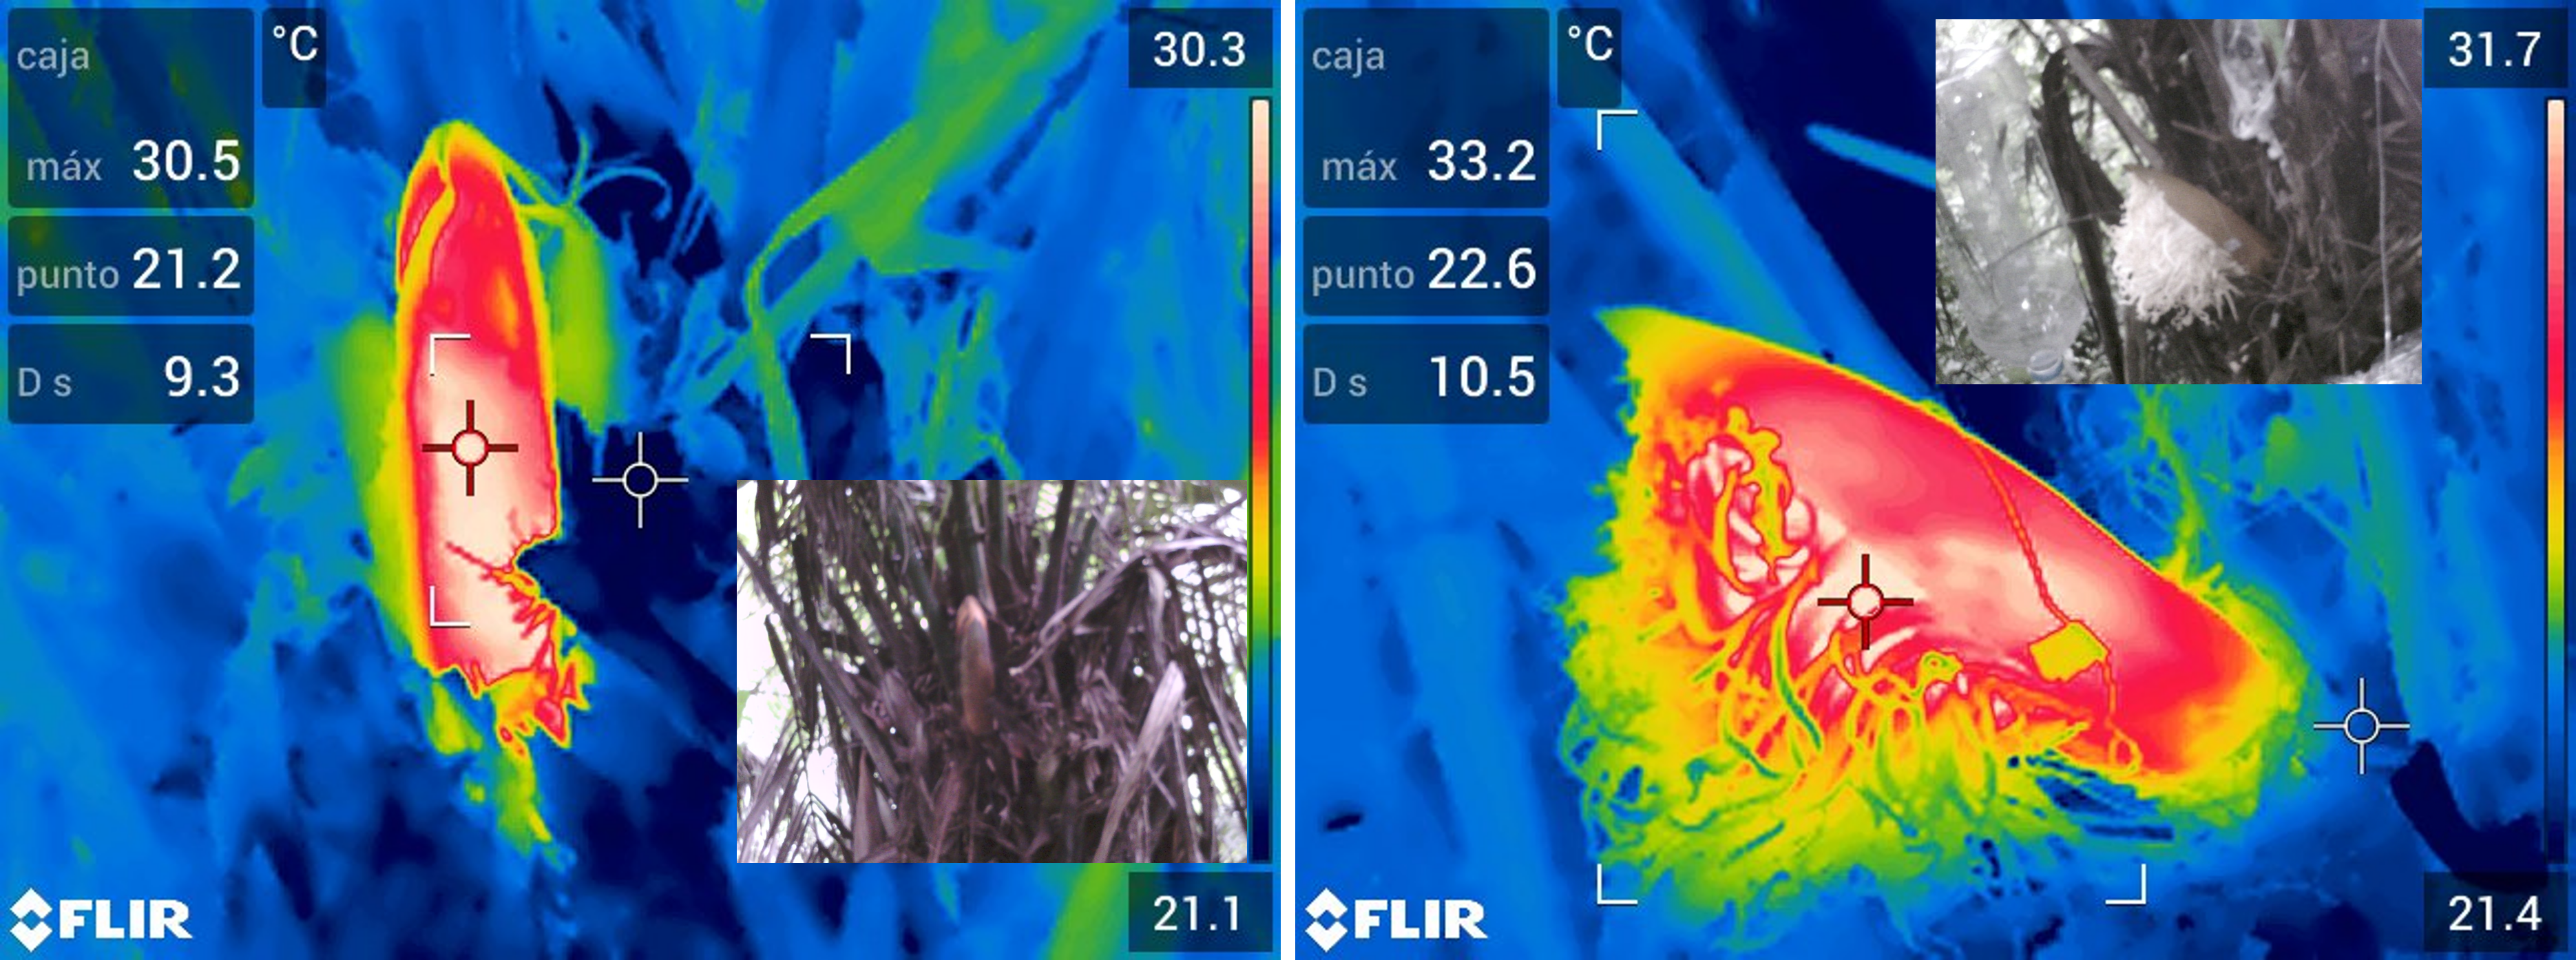 thermal-images-bud-inflorescence.png